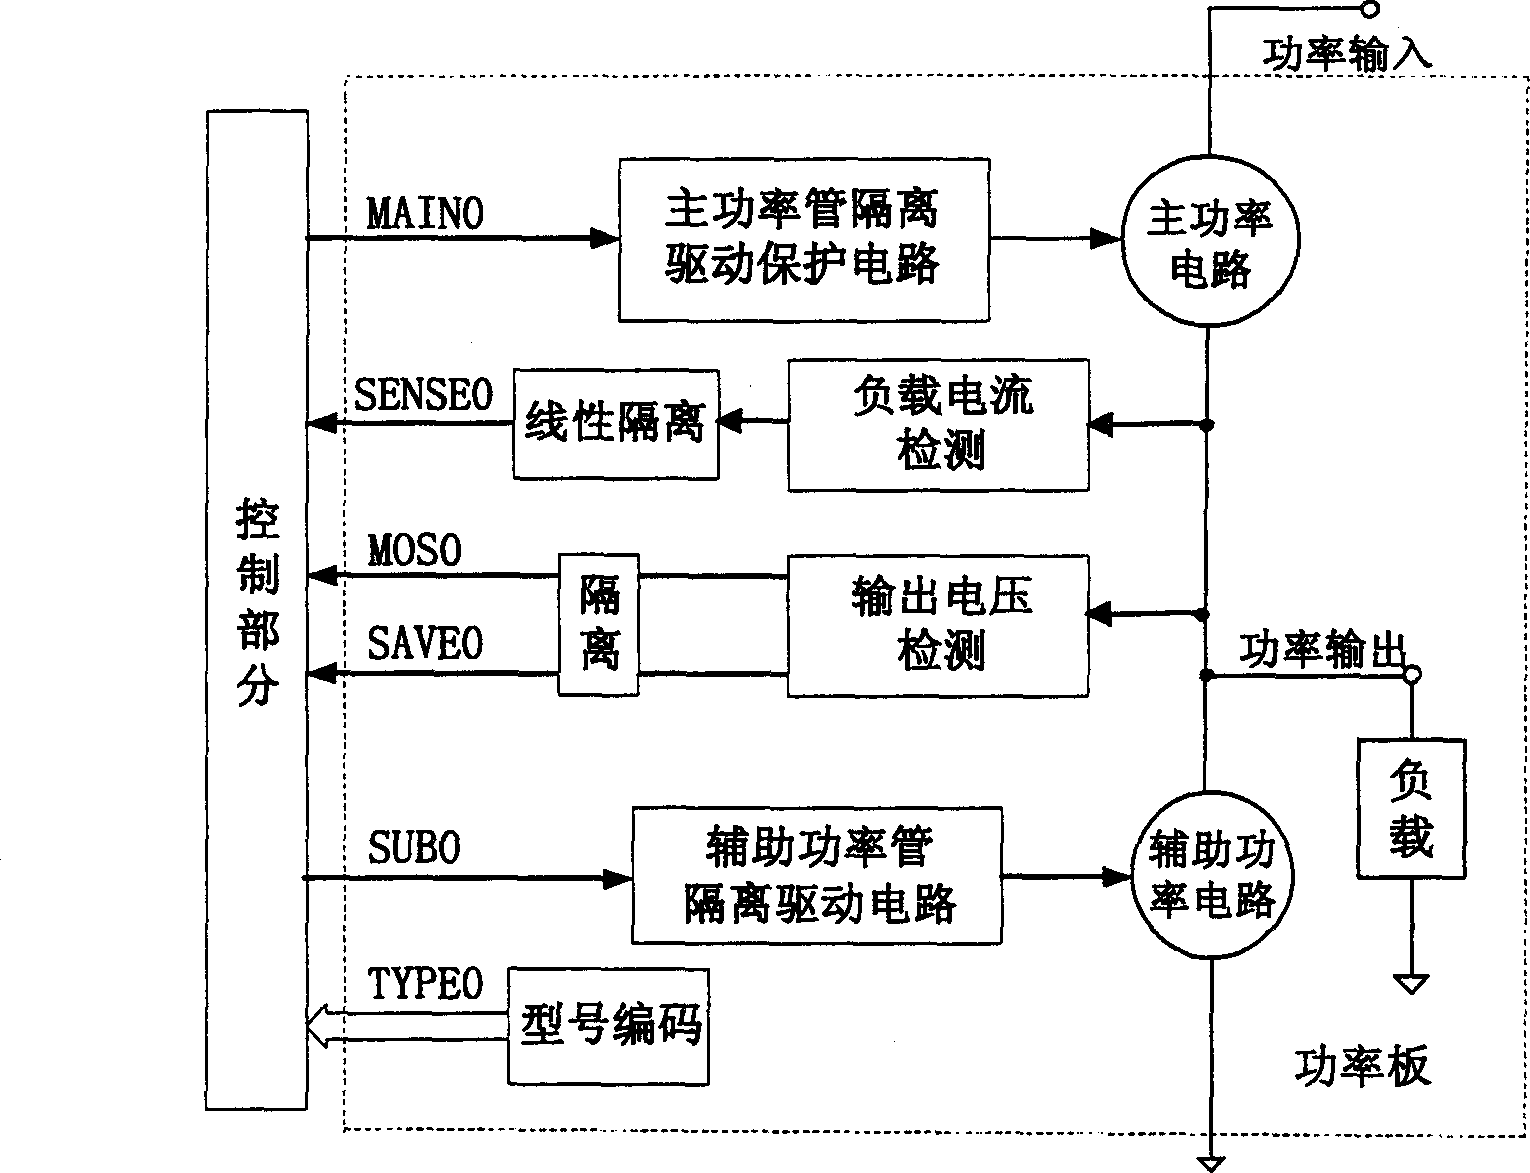 Multipath solid-state power switch digitized integration controlling method